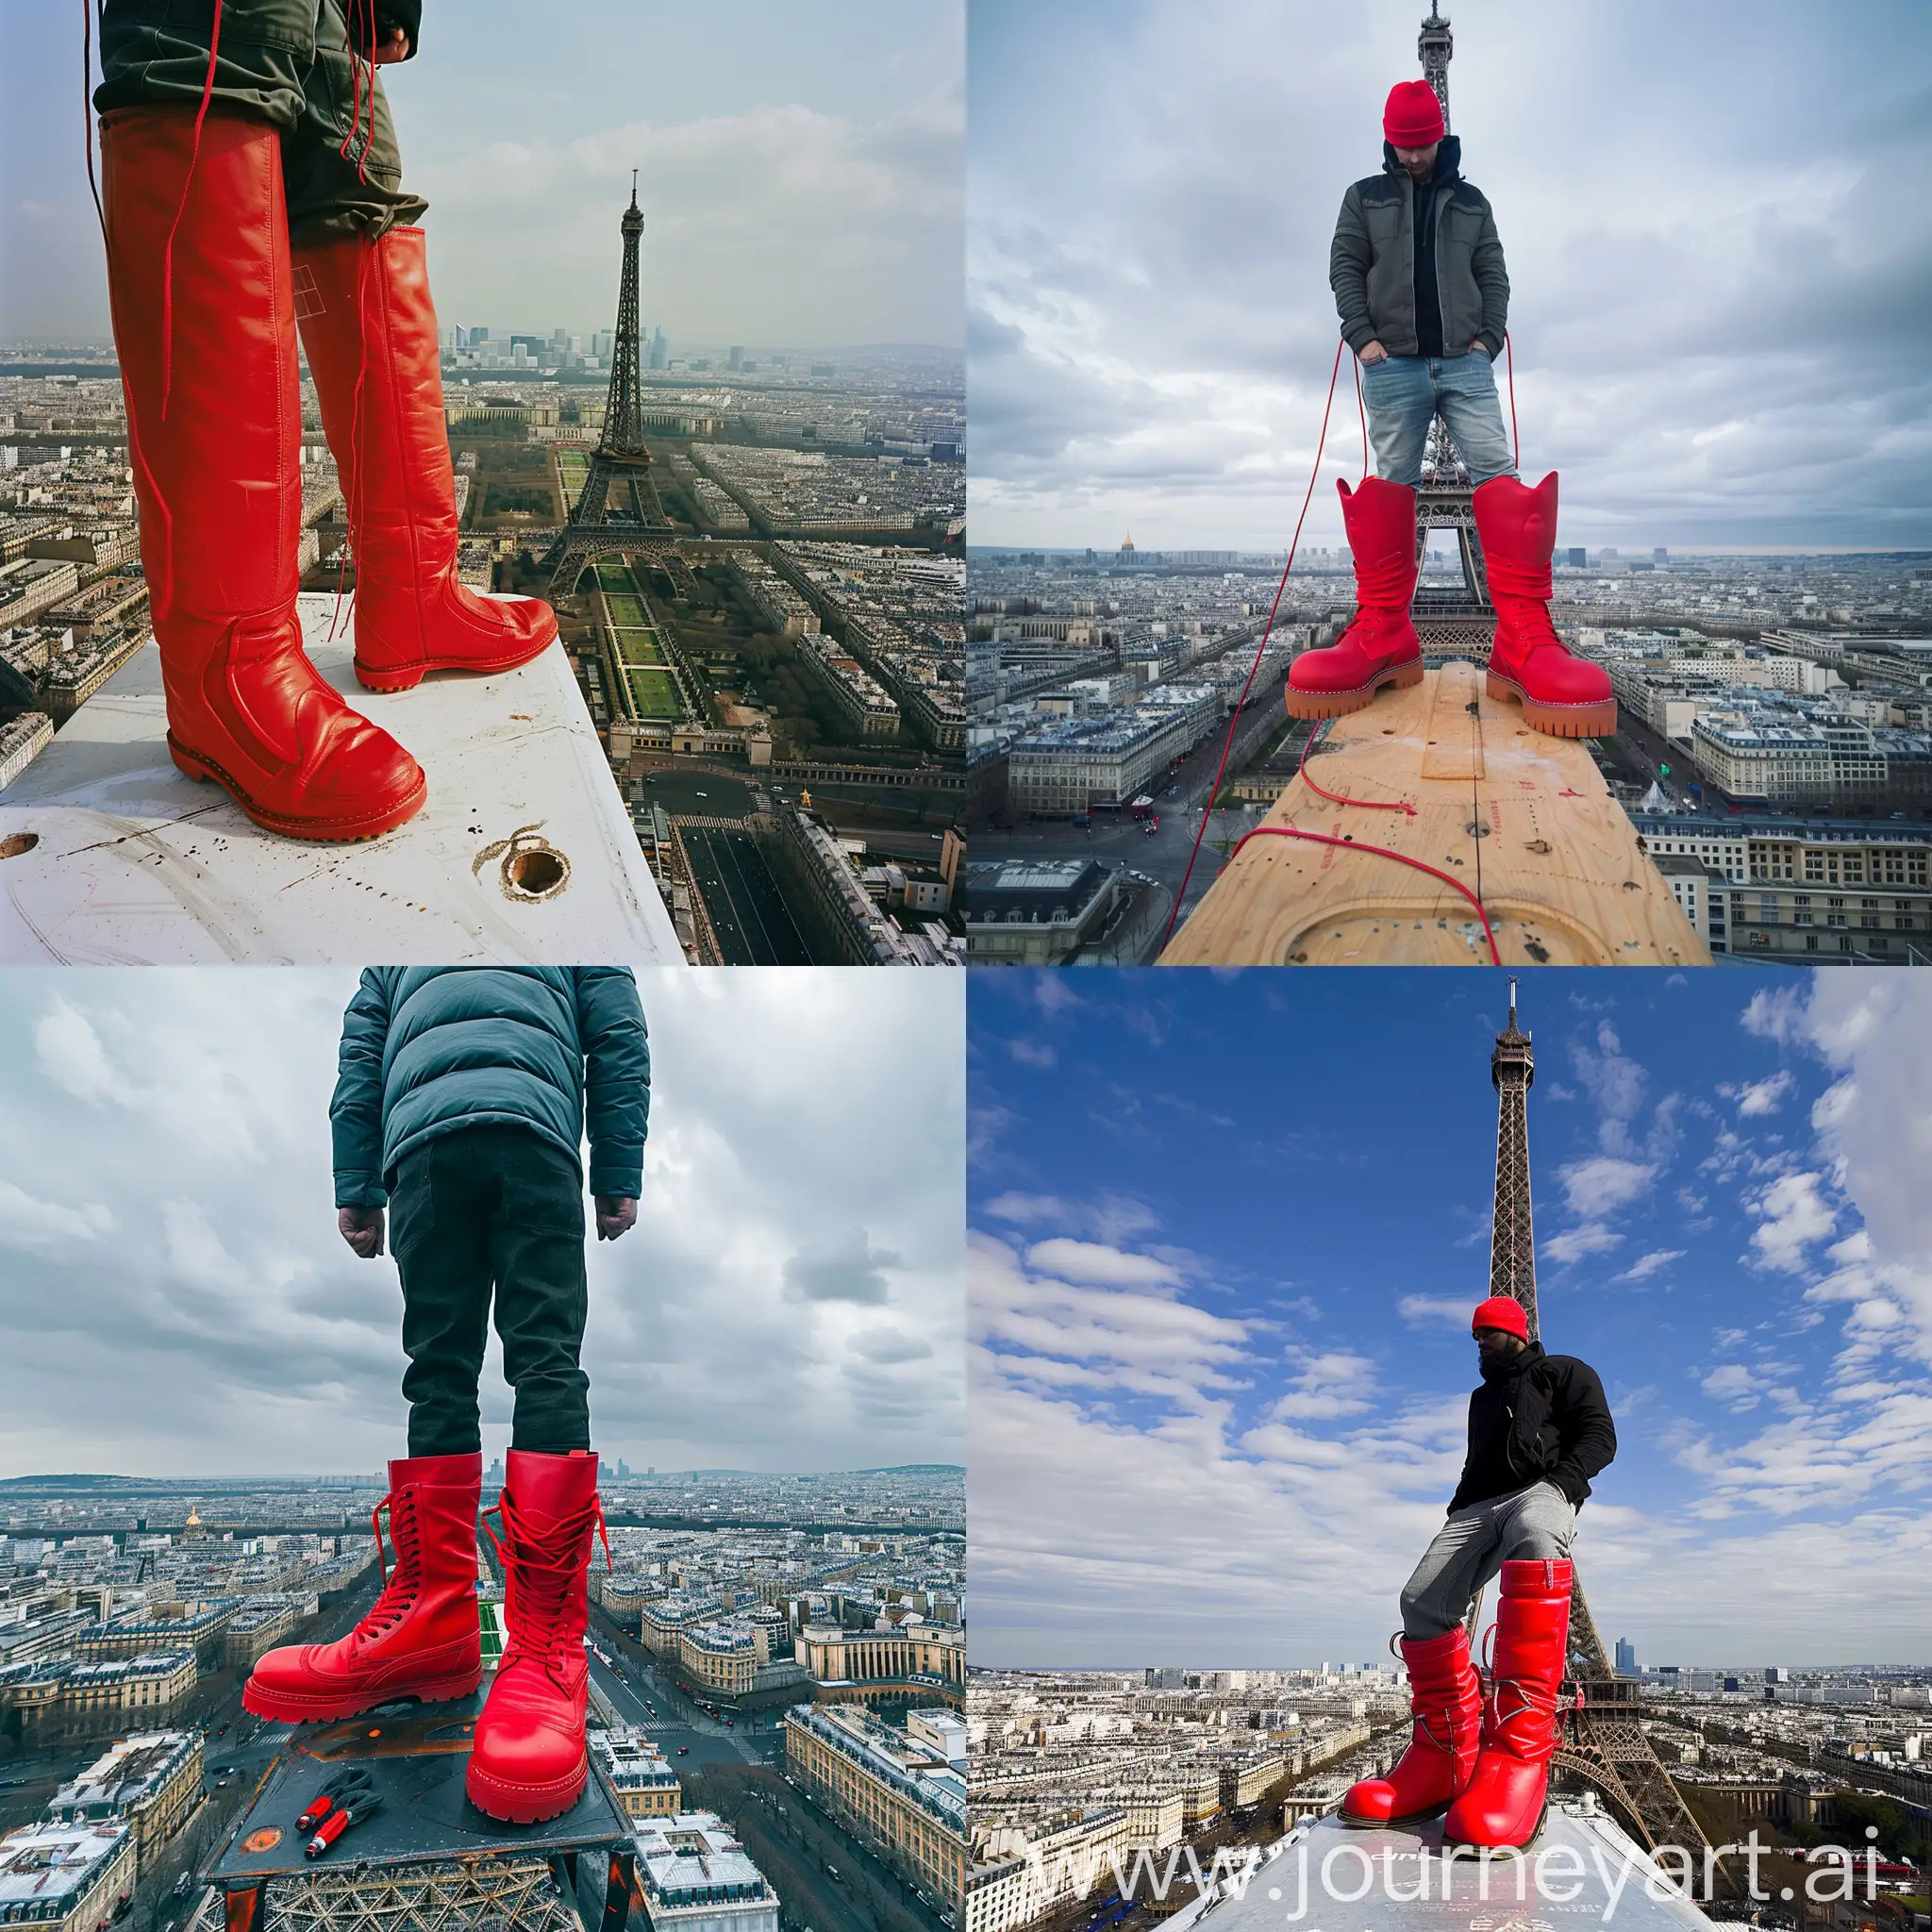 A man in big red boots on top of the Eiffel Tower